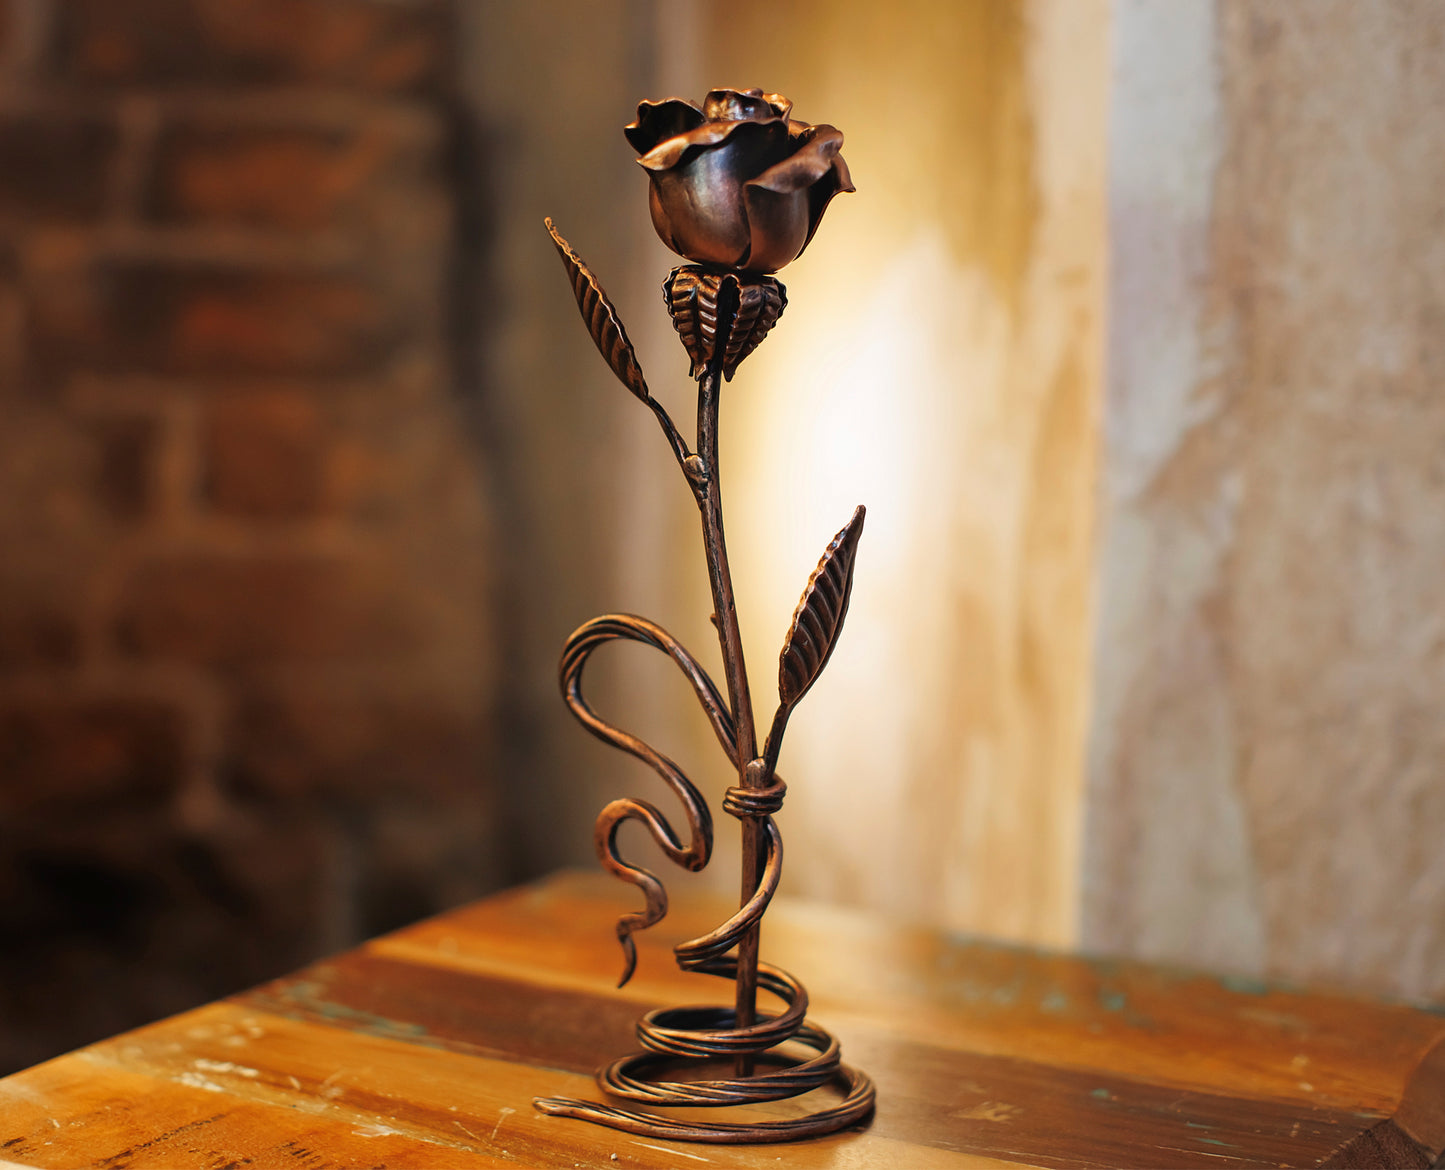 Handcrafted Copper Rose - 7th Anniversary Gift for Wife, Romantic Everlasting Love Gift, Copper Anniversary